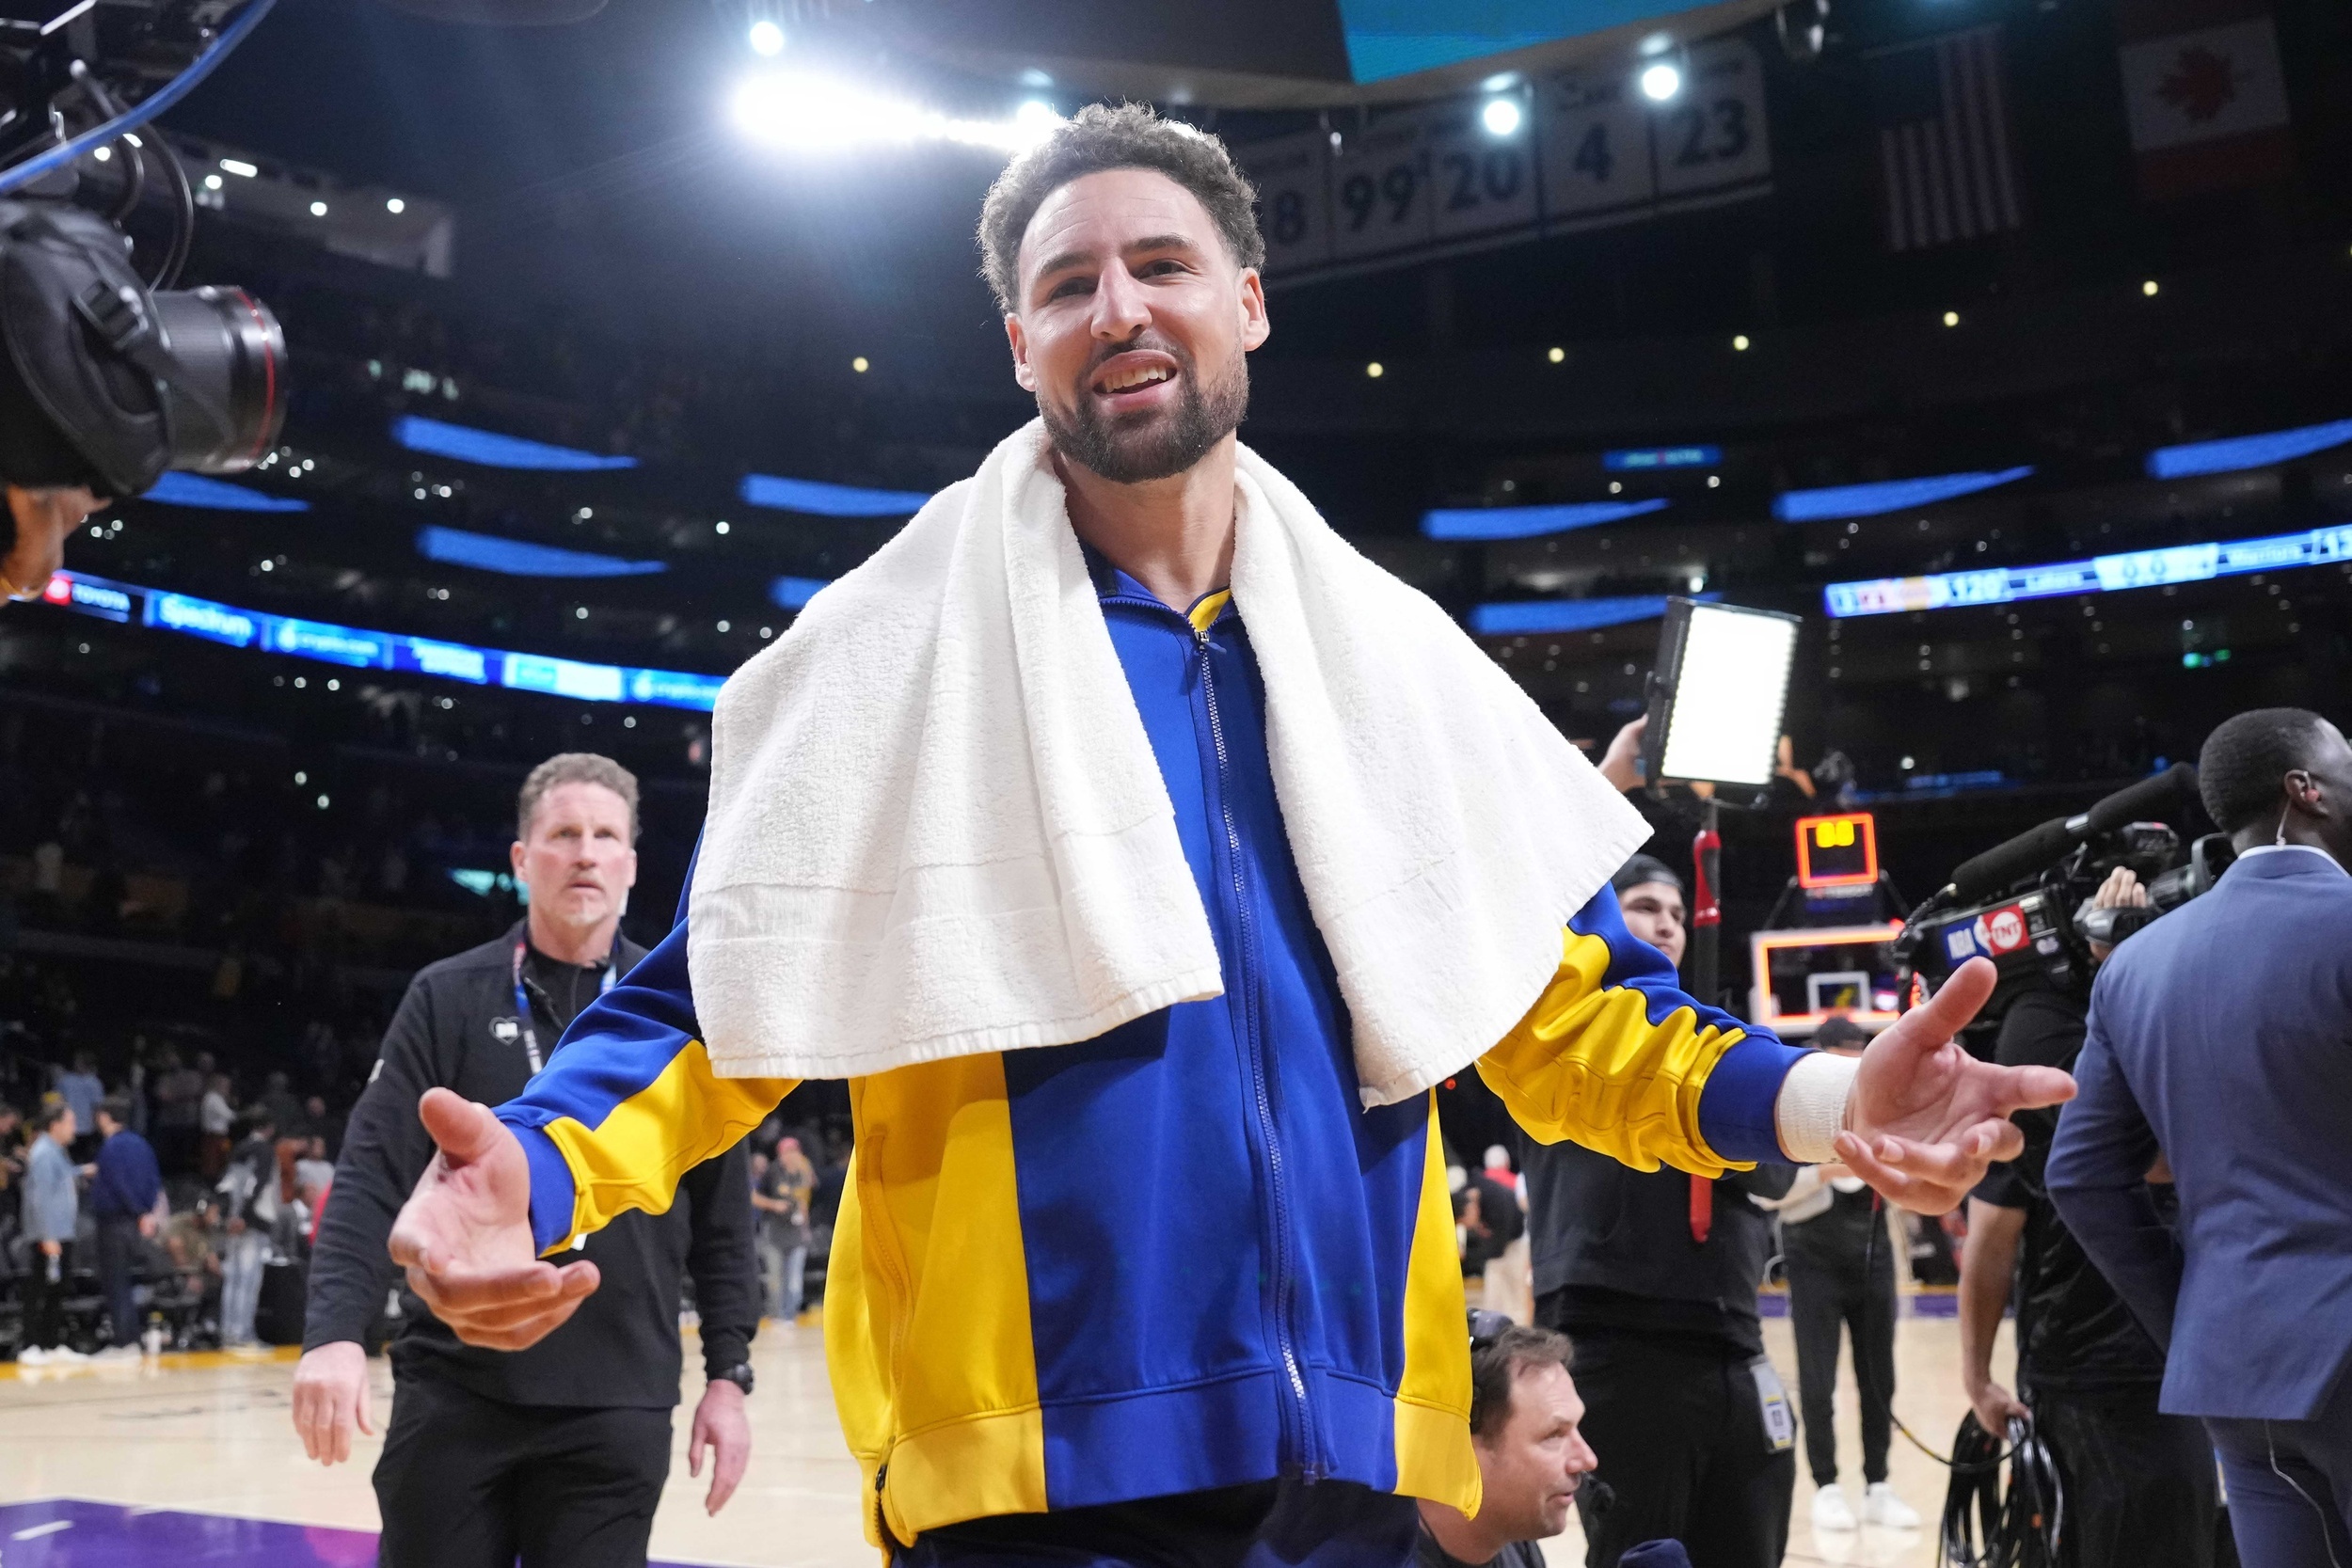 magic, klay thompson reportedly have 'mutual interest'